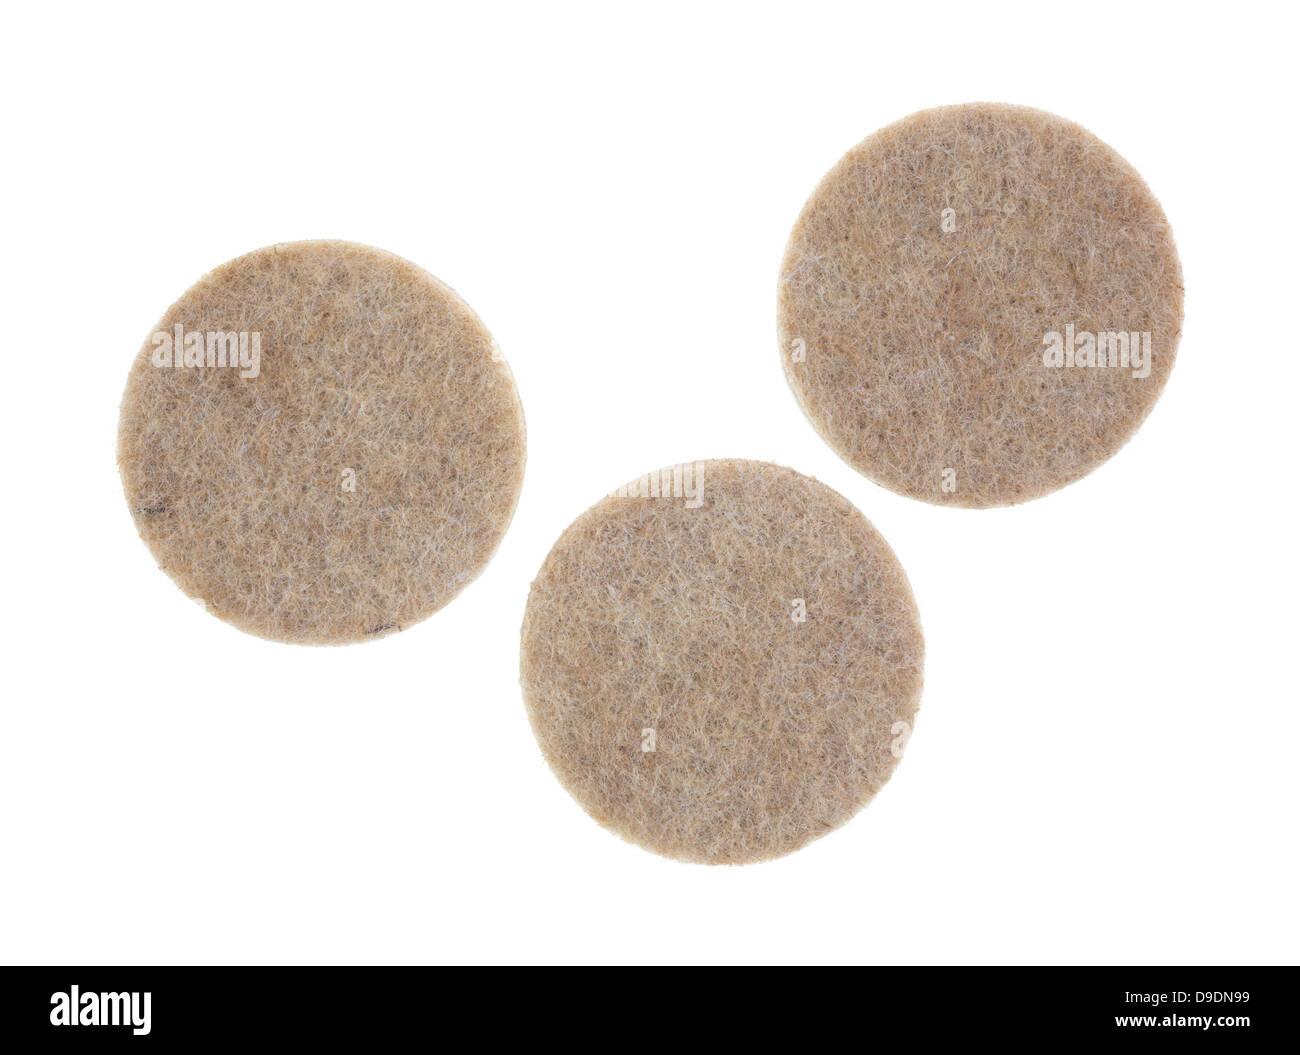 Three felt surface protectors on a white background. Stock Photo